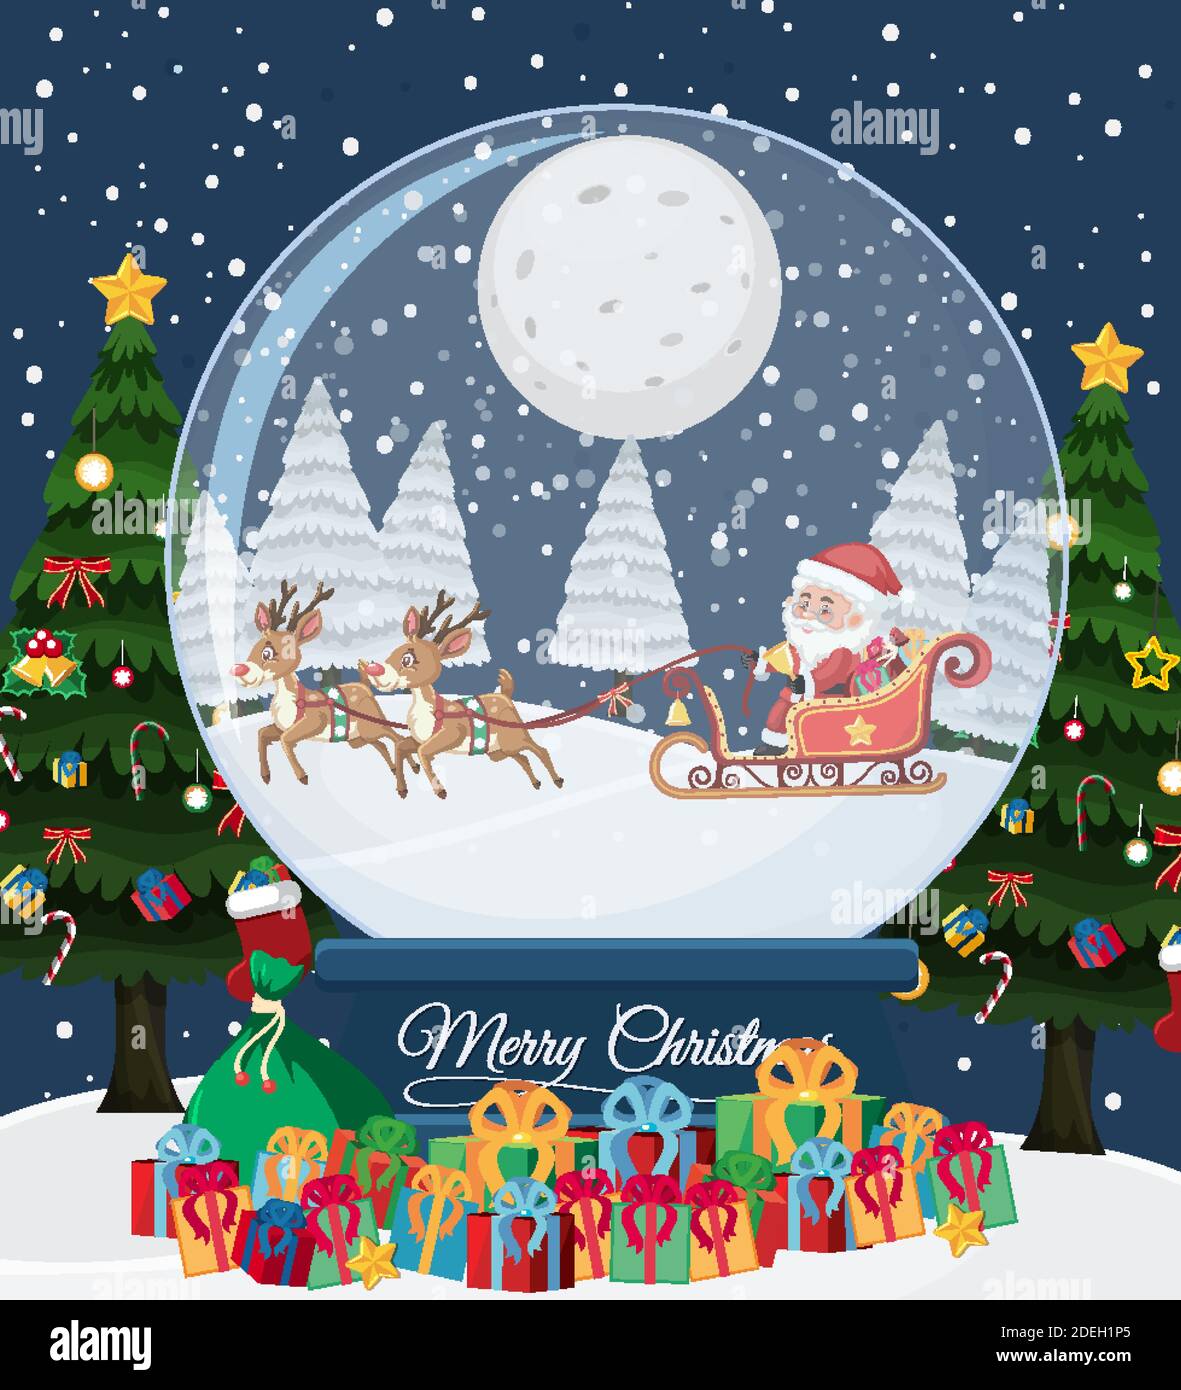 Santa on sleigh with deer delivery gift illustration Stock Vector Image ...